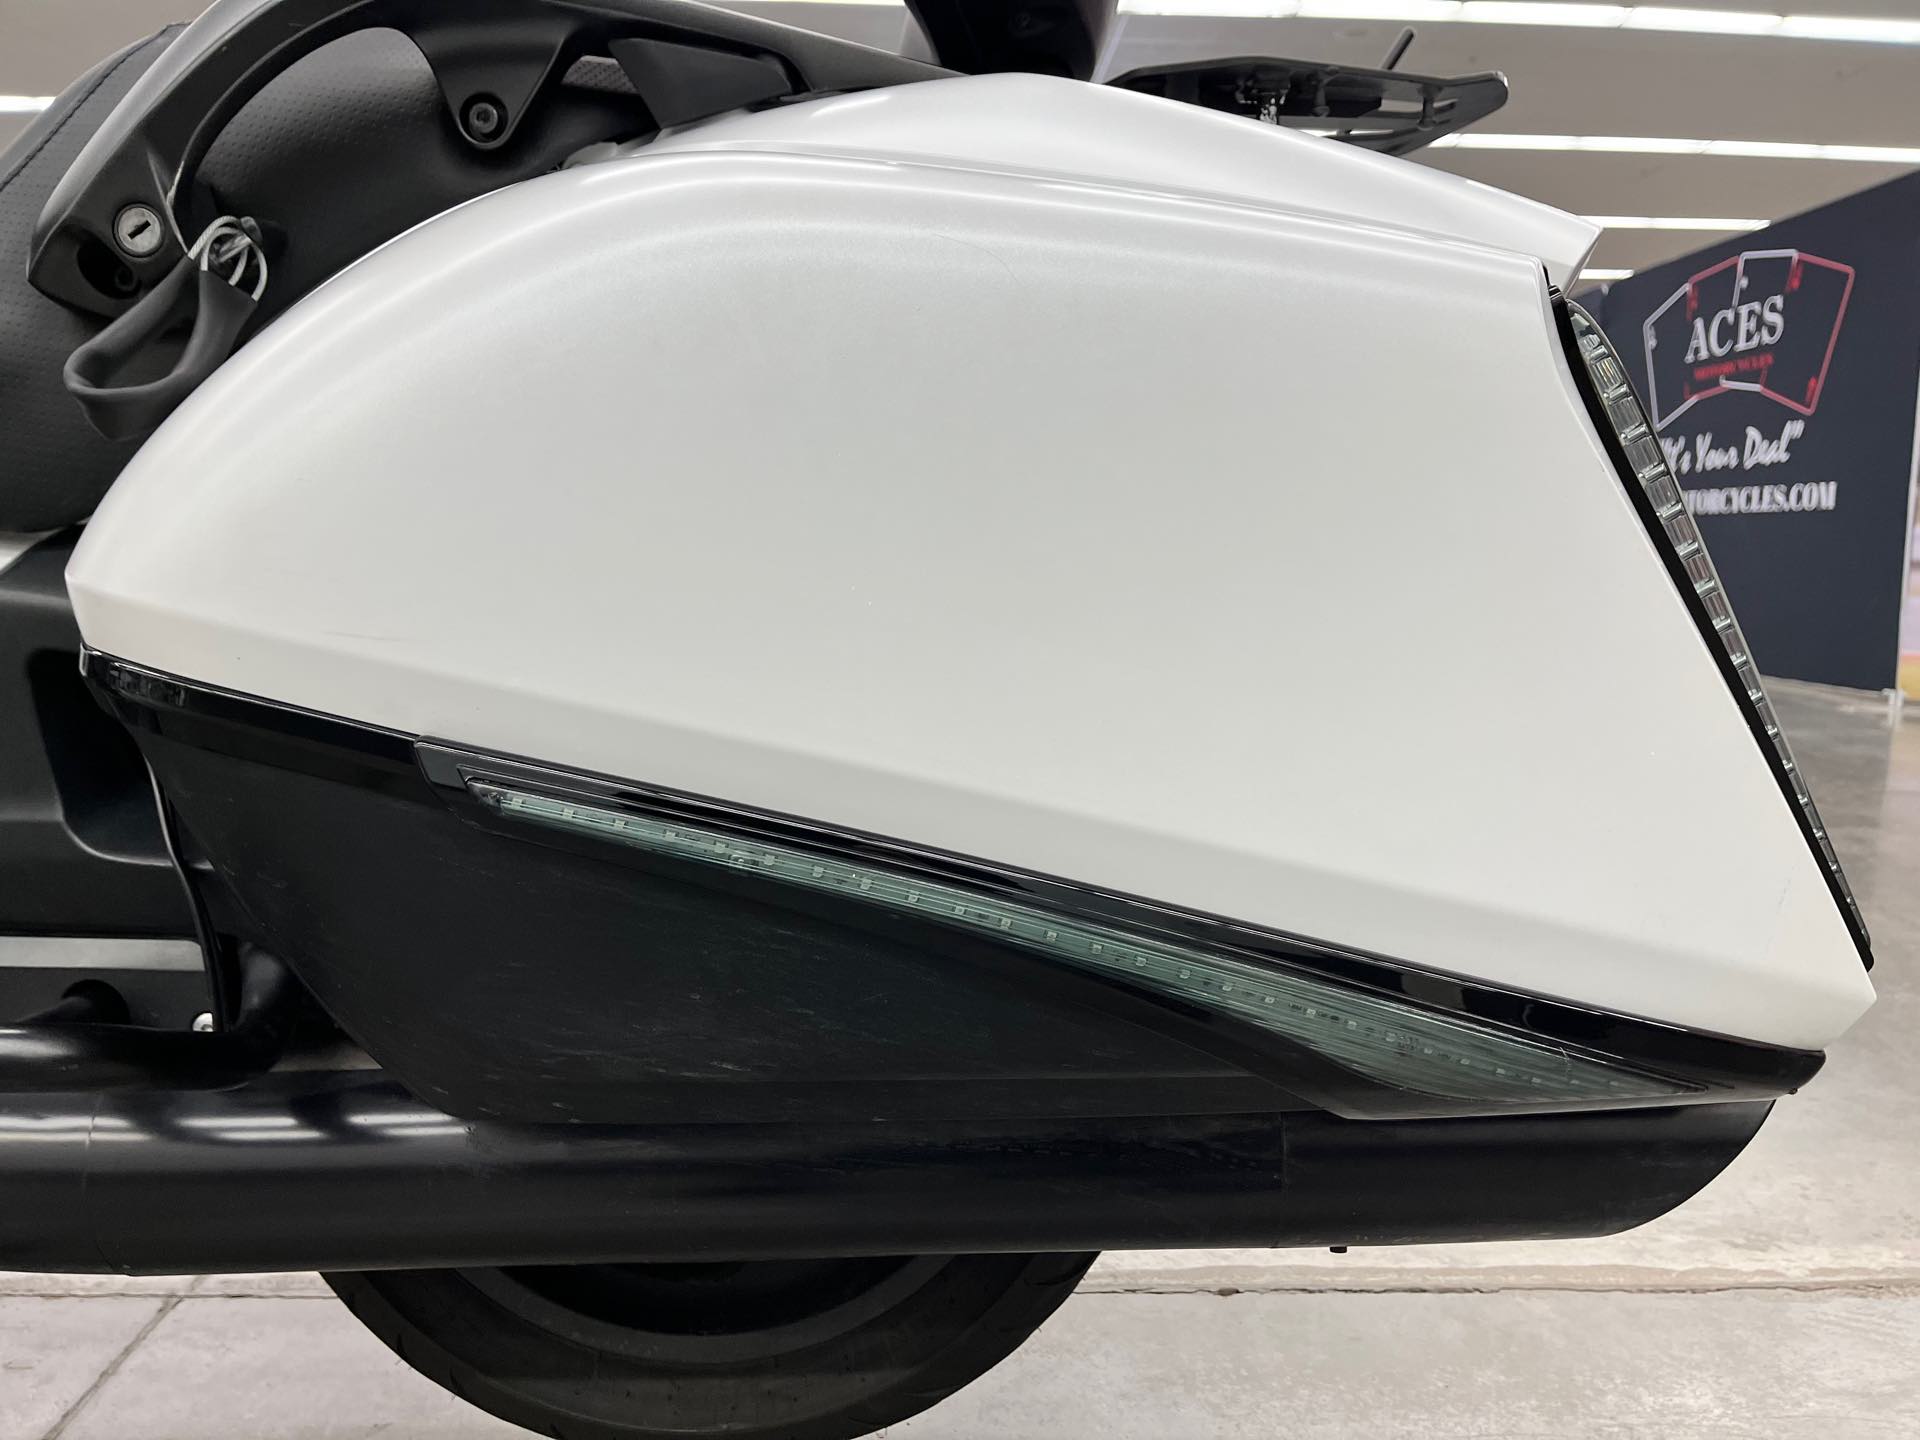 2016 Honda Gold Wing F6B Deluxe at Aces Motorcycles - Denver